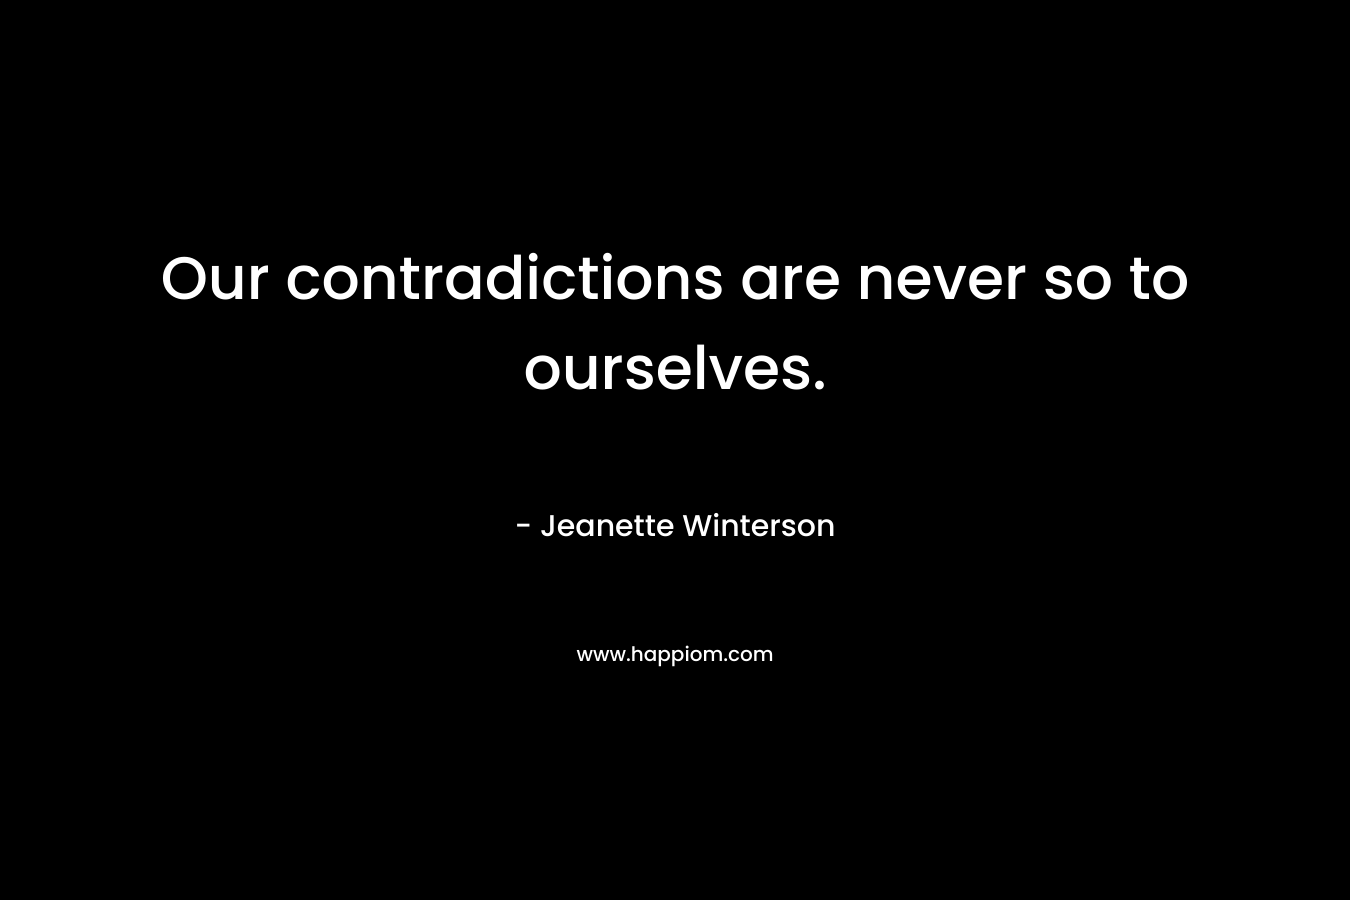 Our contradictions are never so to ourselves. – Jeanette Winterson